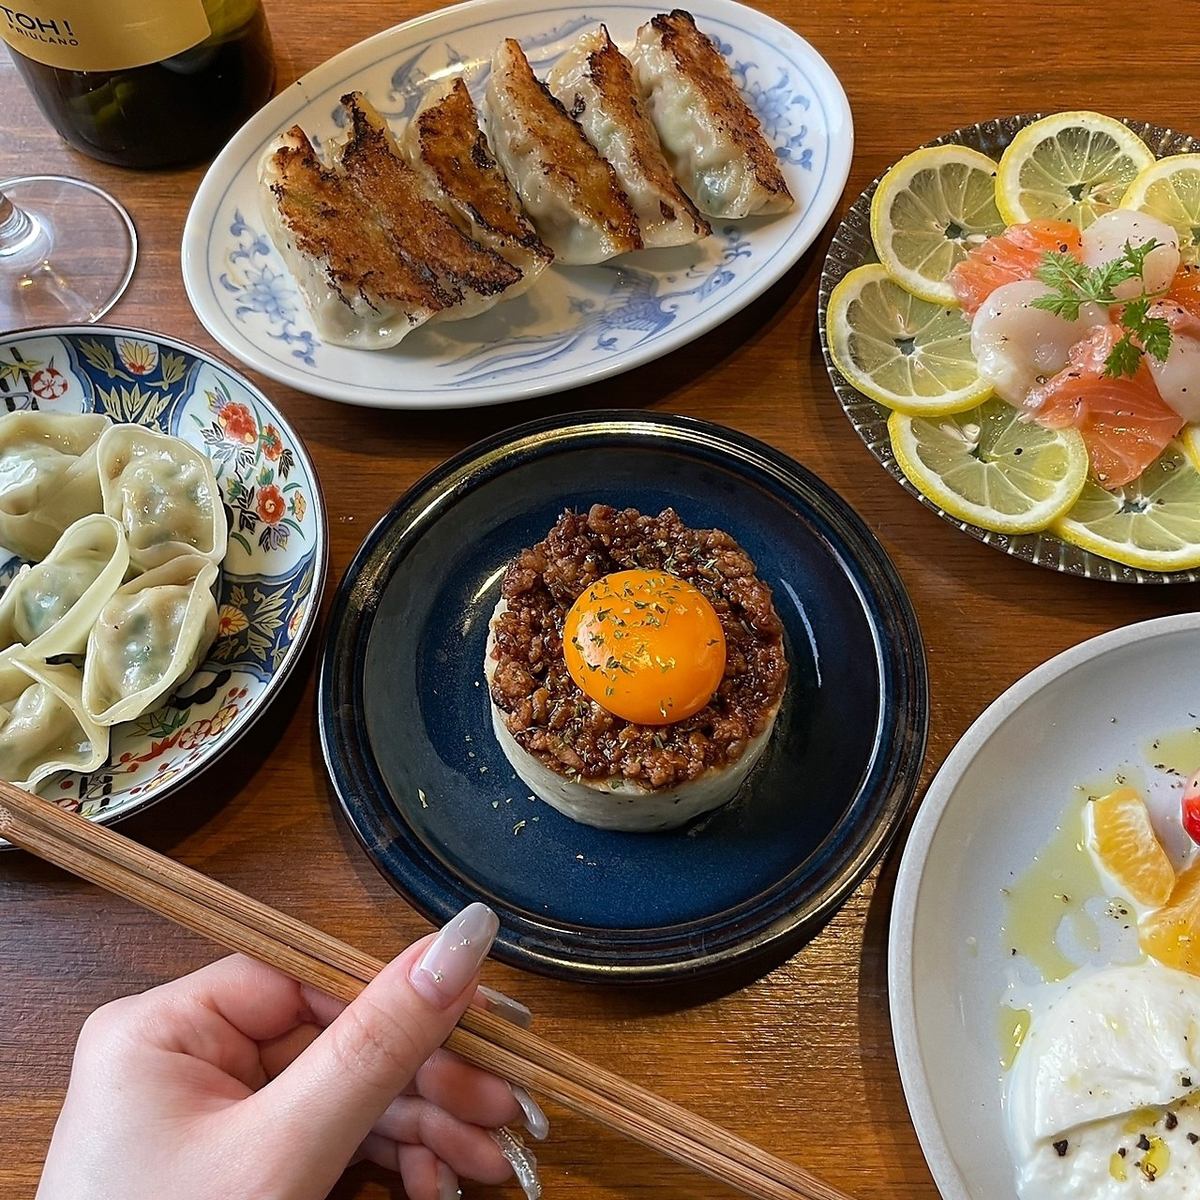 5 minutes walk from Kyoto Station ♪ A shop where you can experience xiaolongbao hand-wrapping! The best toast with dim sum and ate! Groups welcome